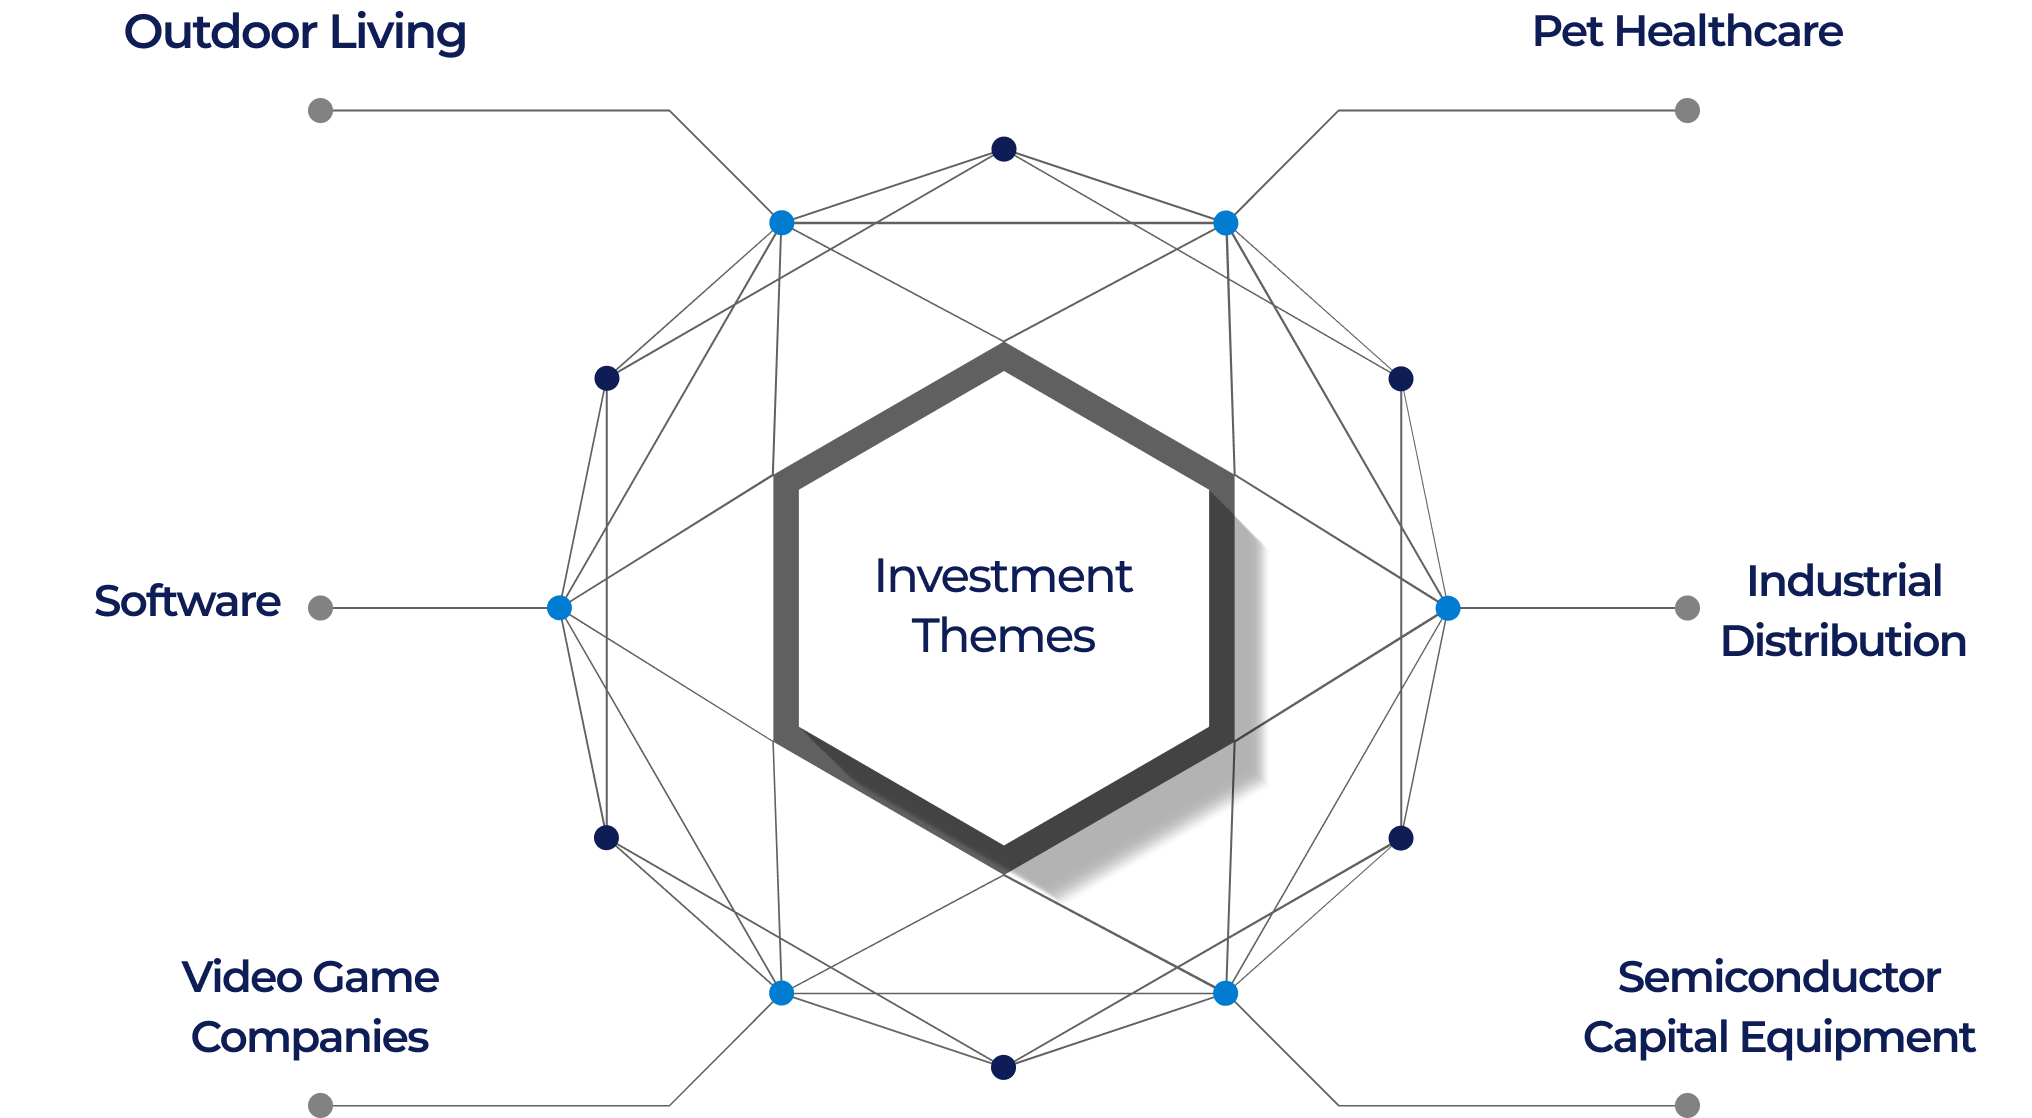 Investment Themes infographic